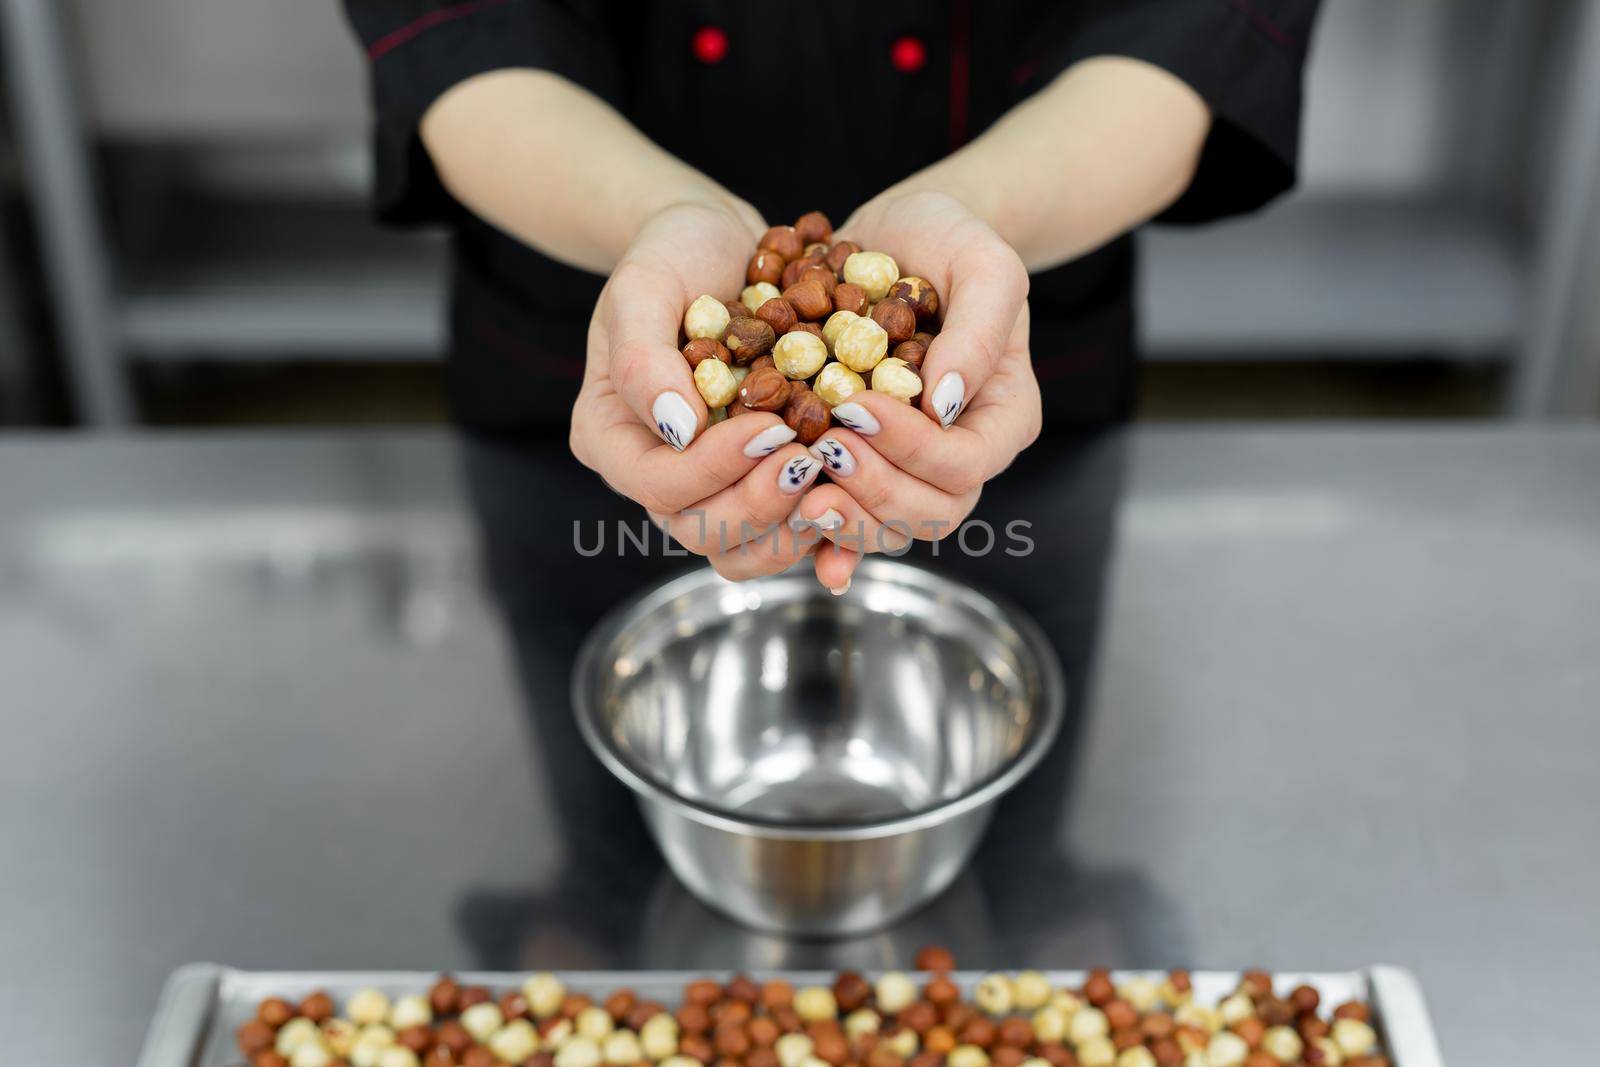 Pastry chef holds a lot of hazelnuts in his hands by StudioPeace